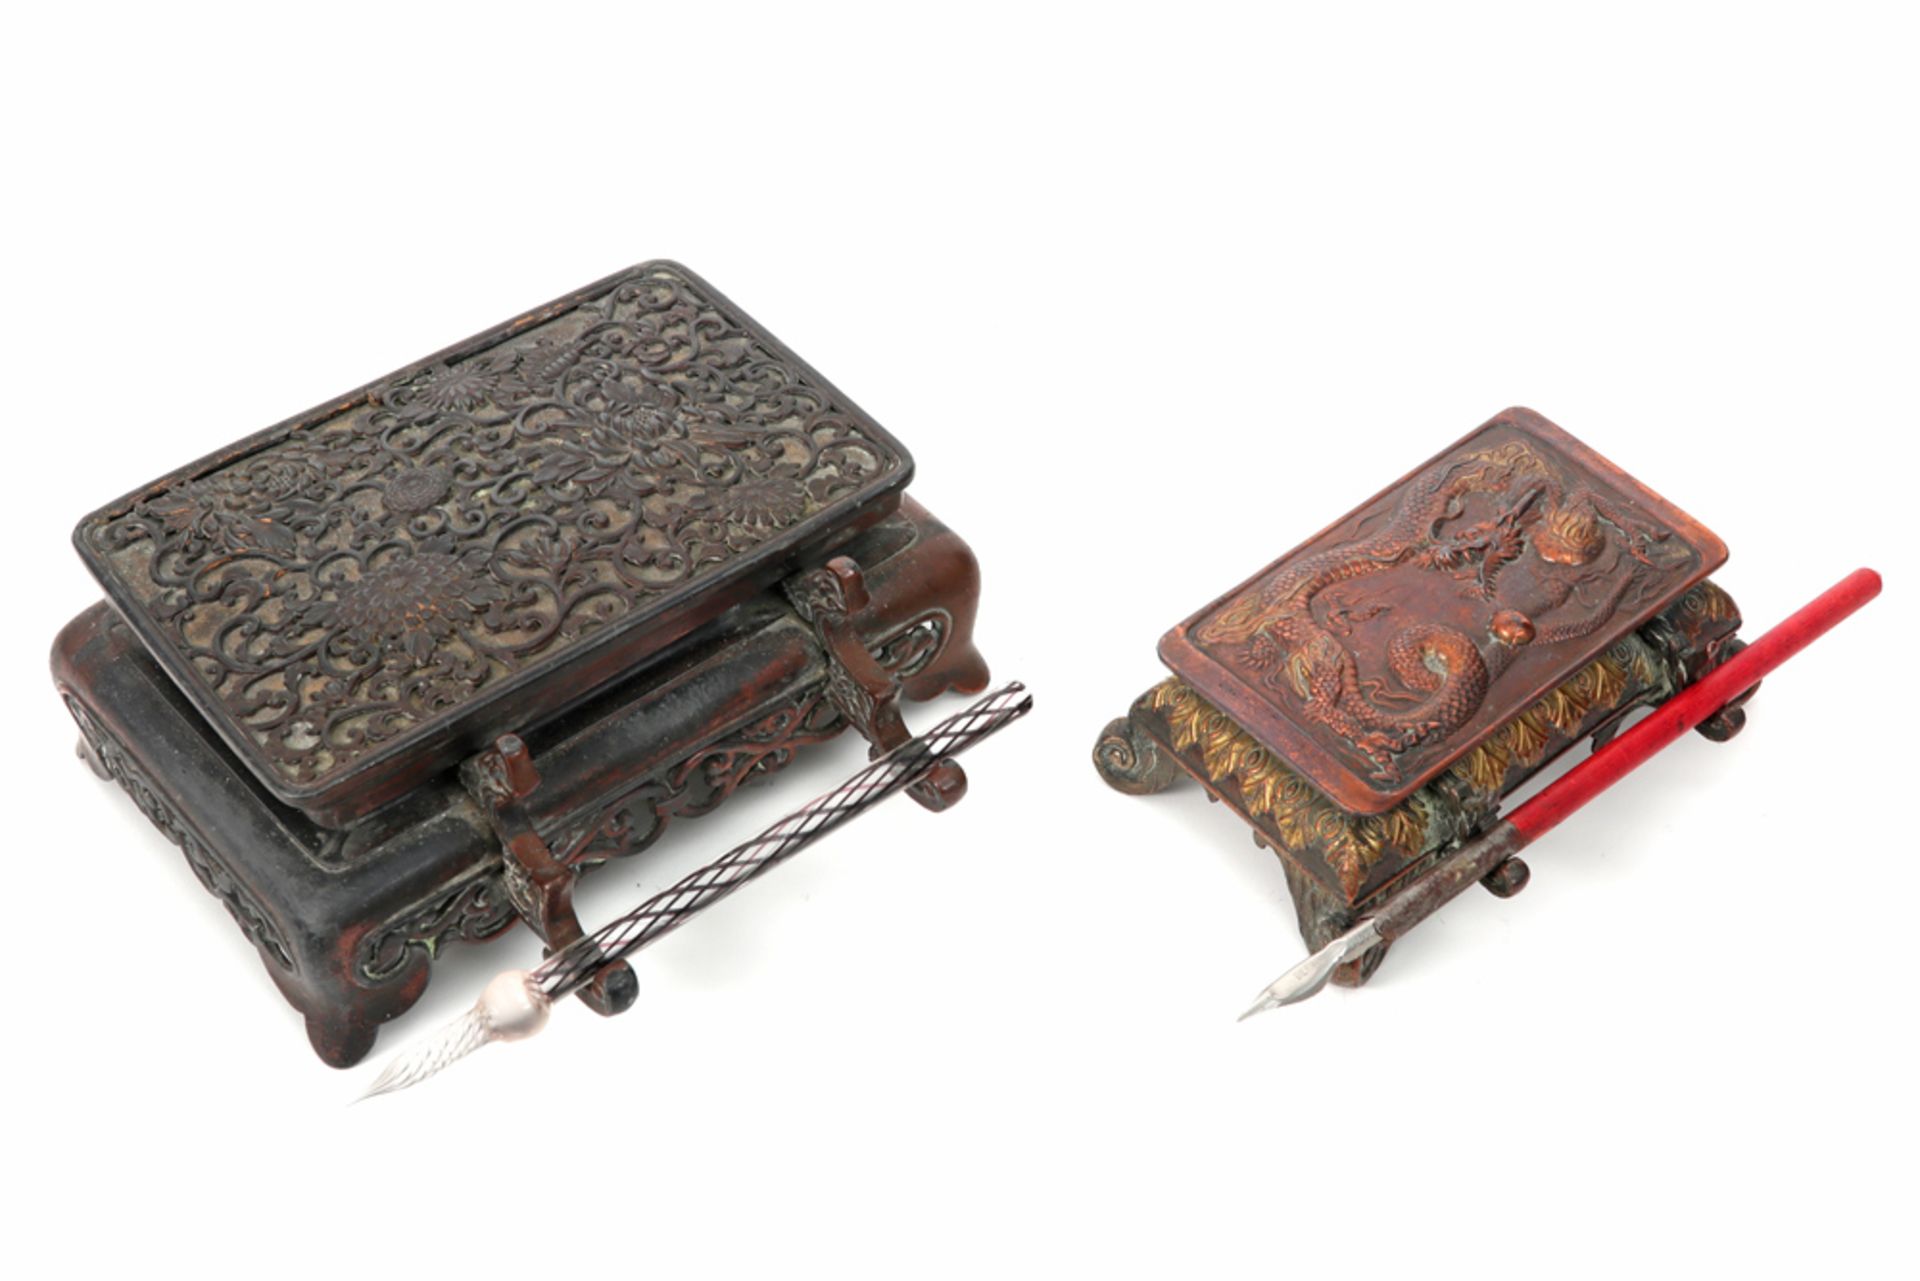 two antique Chinese style inkstands, one in gilded metal (with dragon decor) and one in bronze